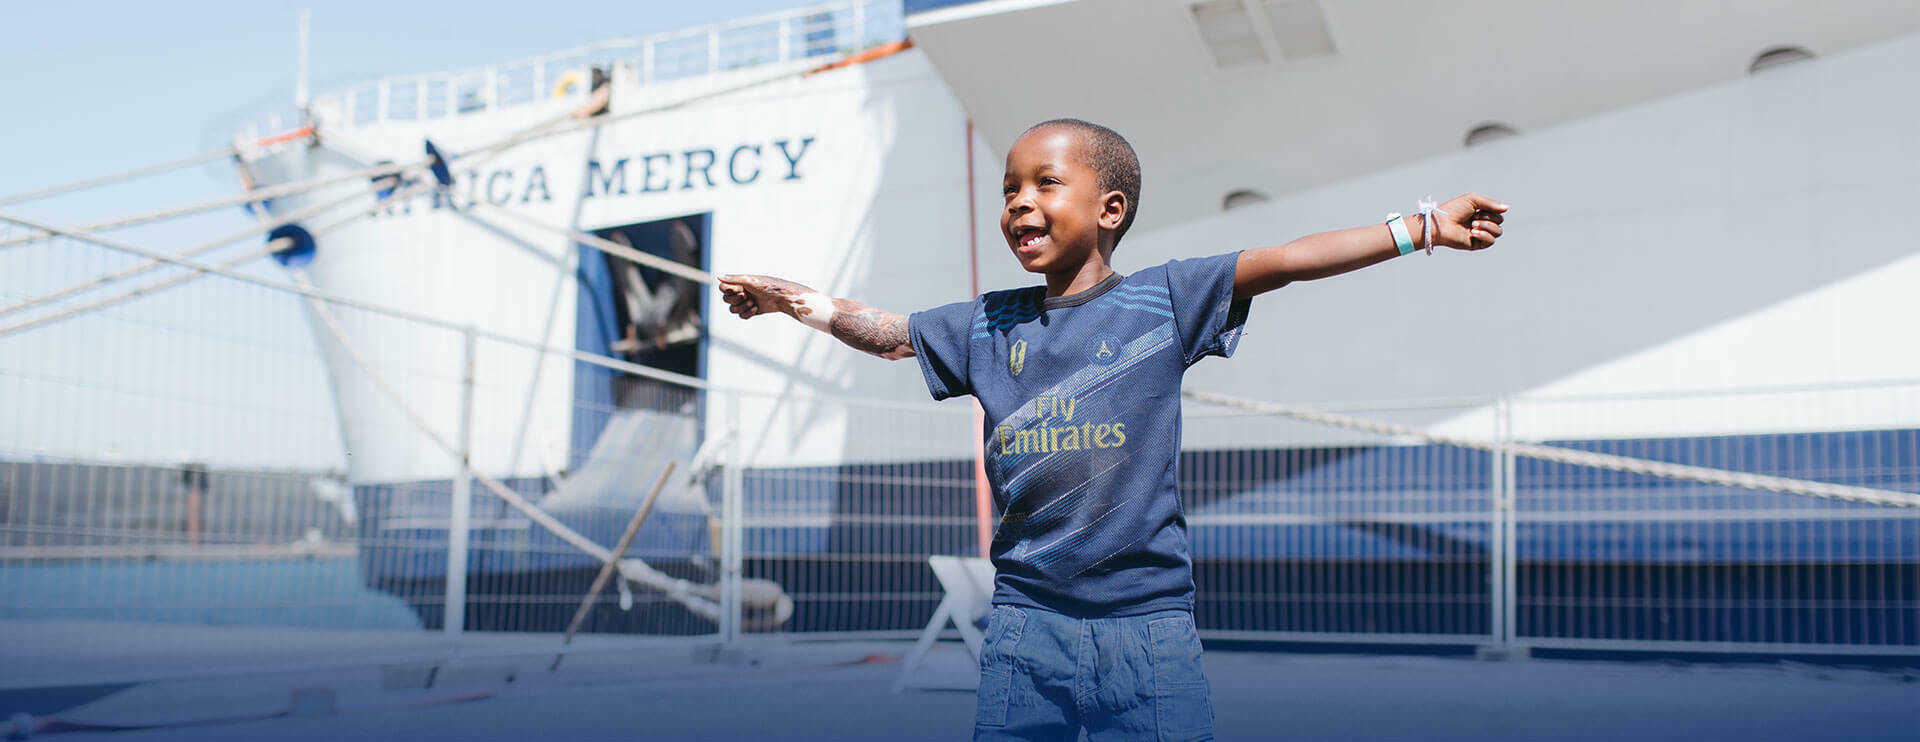 URComped supports Mercy Ships